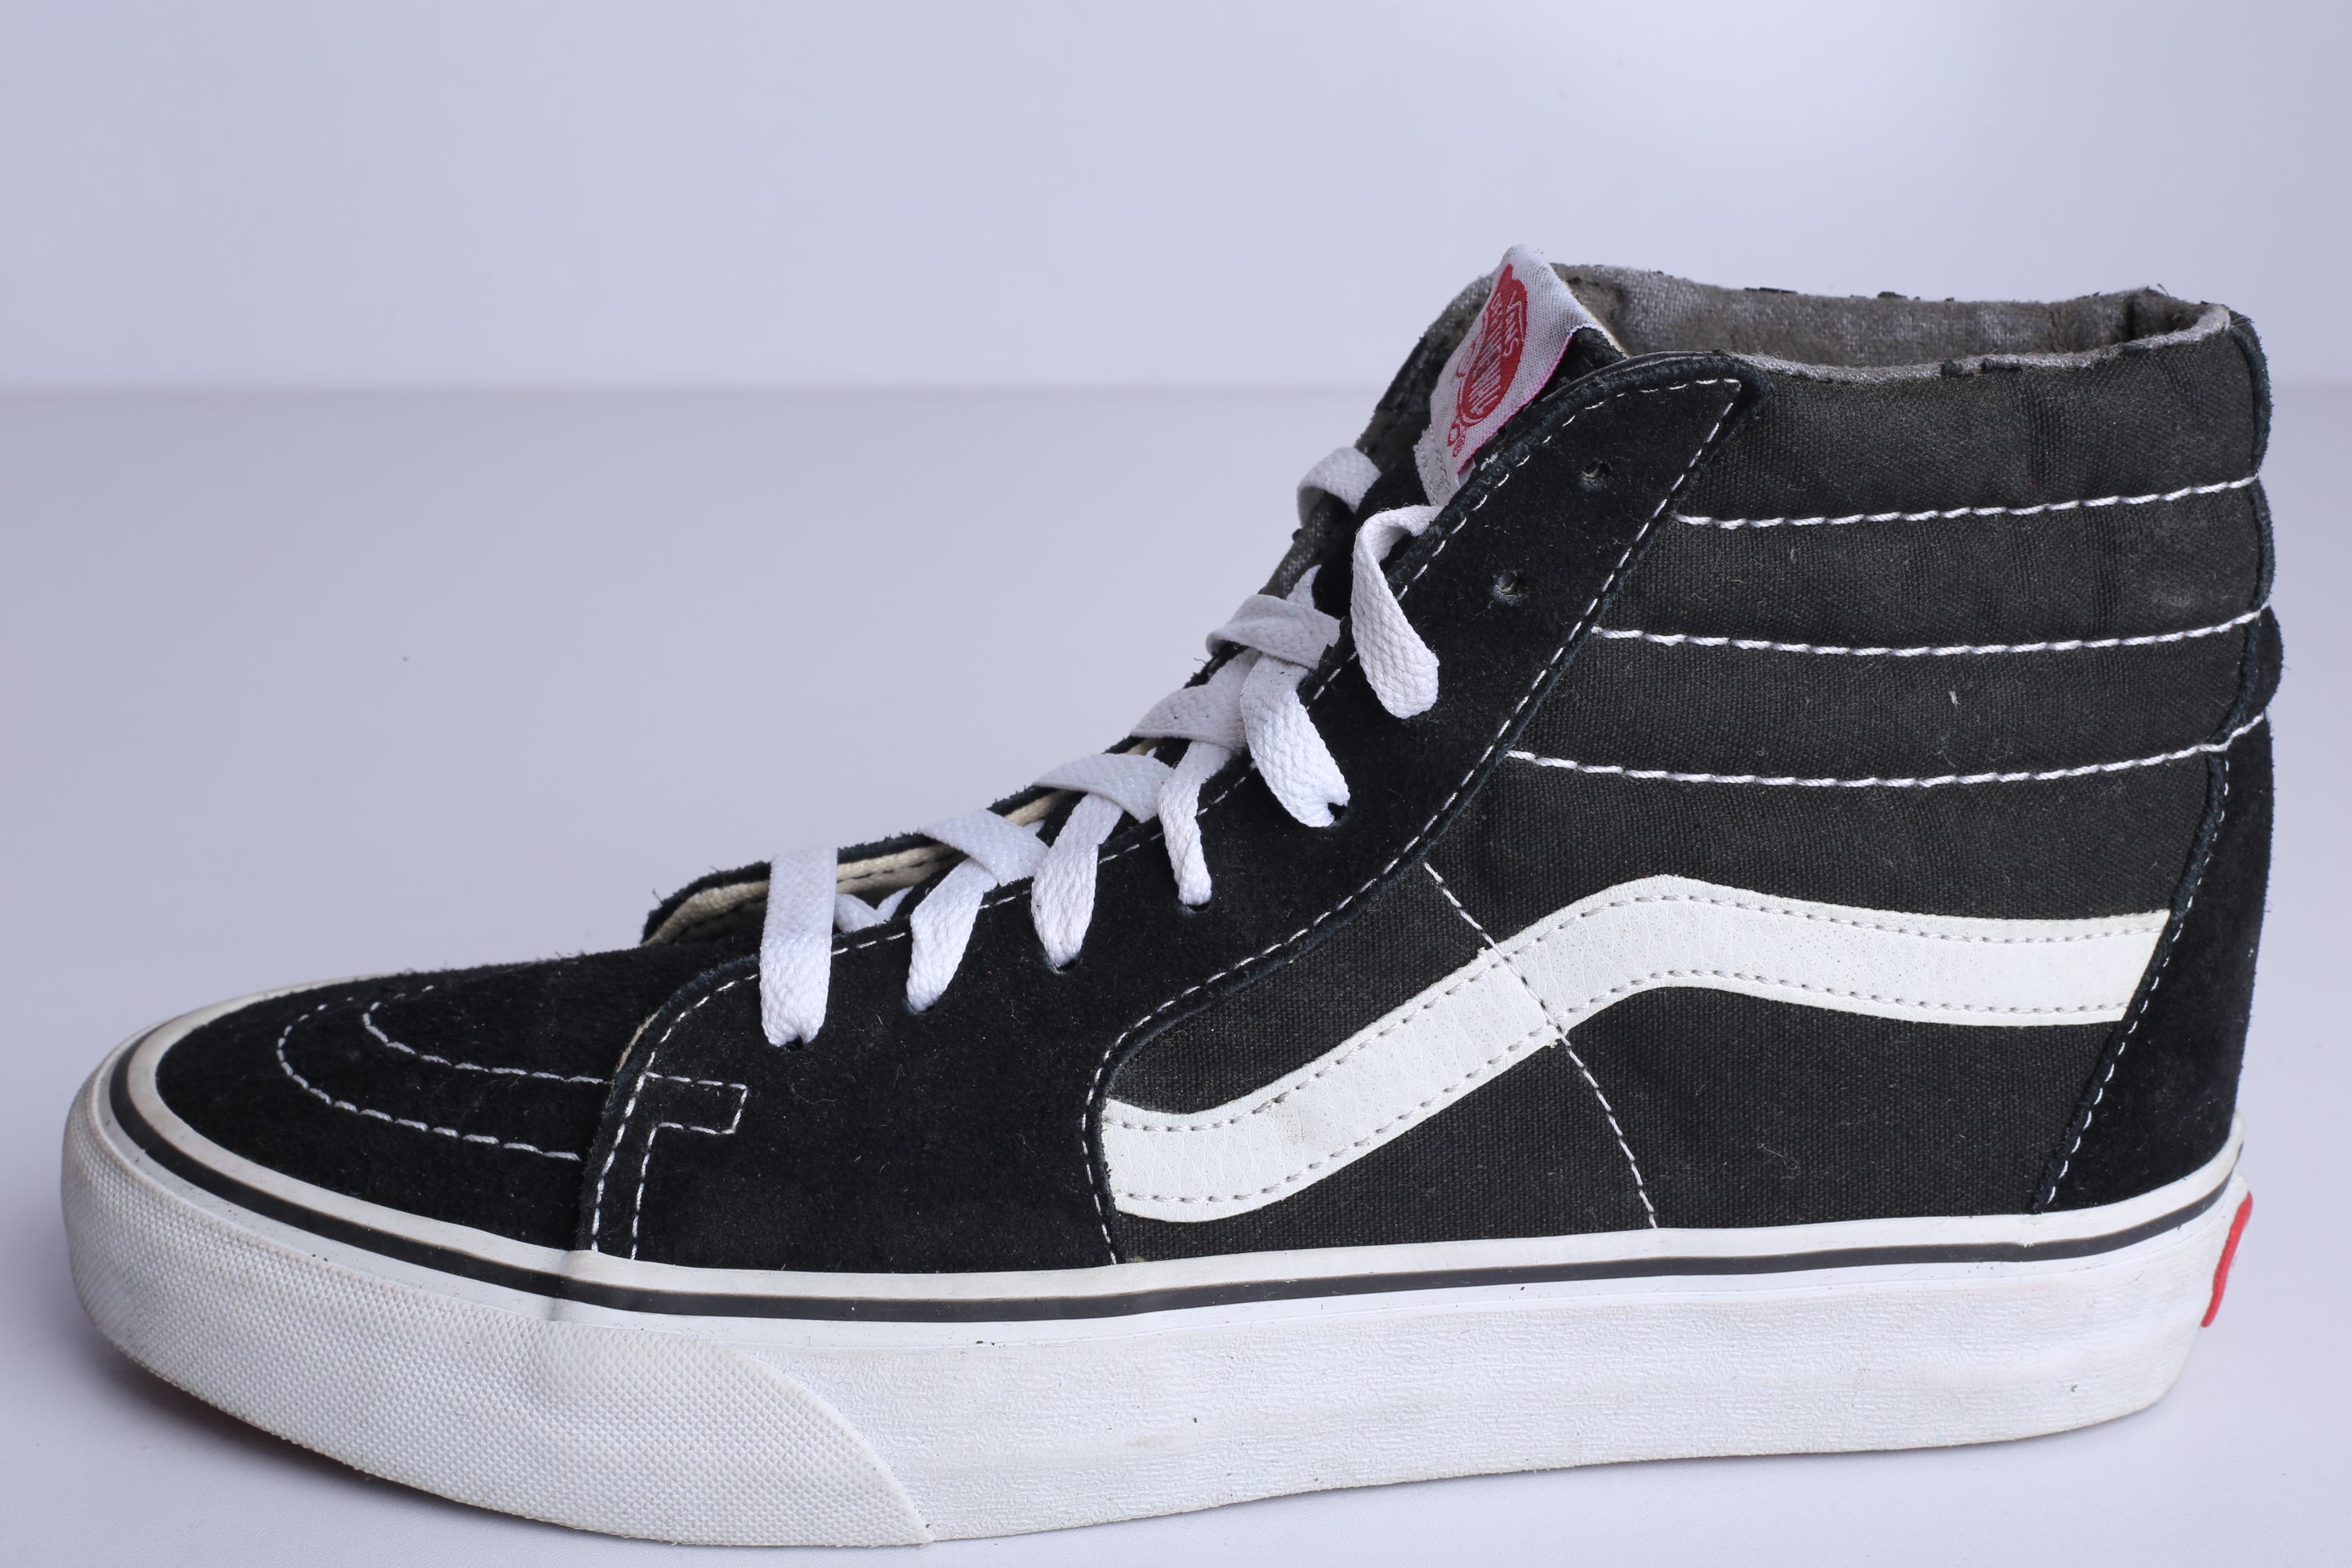 Vans Off the Wall Sk8 High Sneaker Black - (Condition Premium)